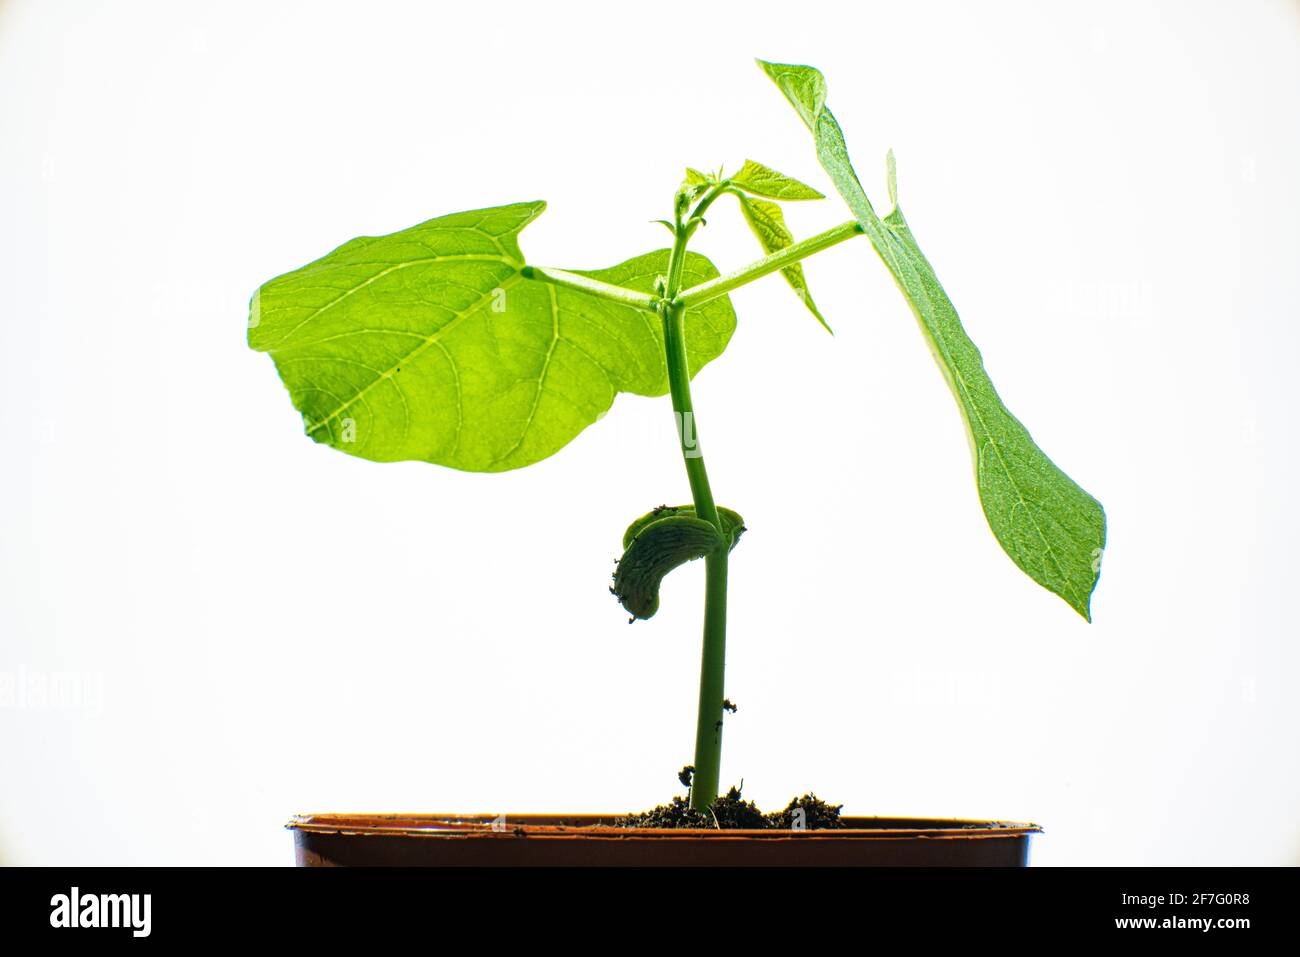 Young plant growing Stock Photo